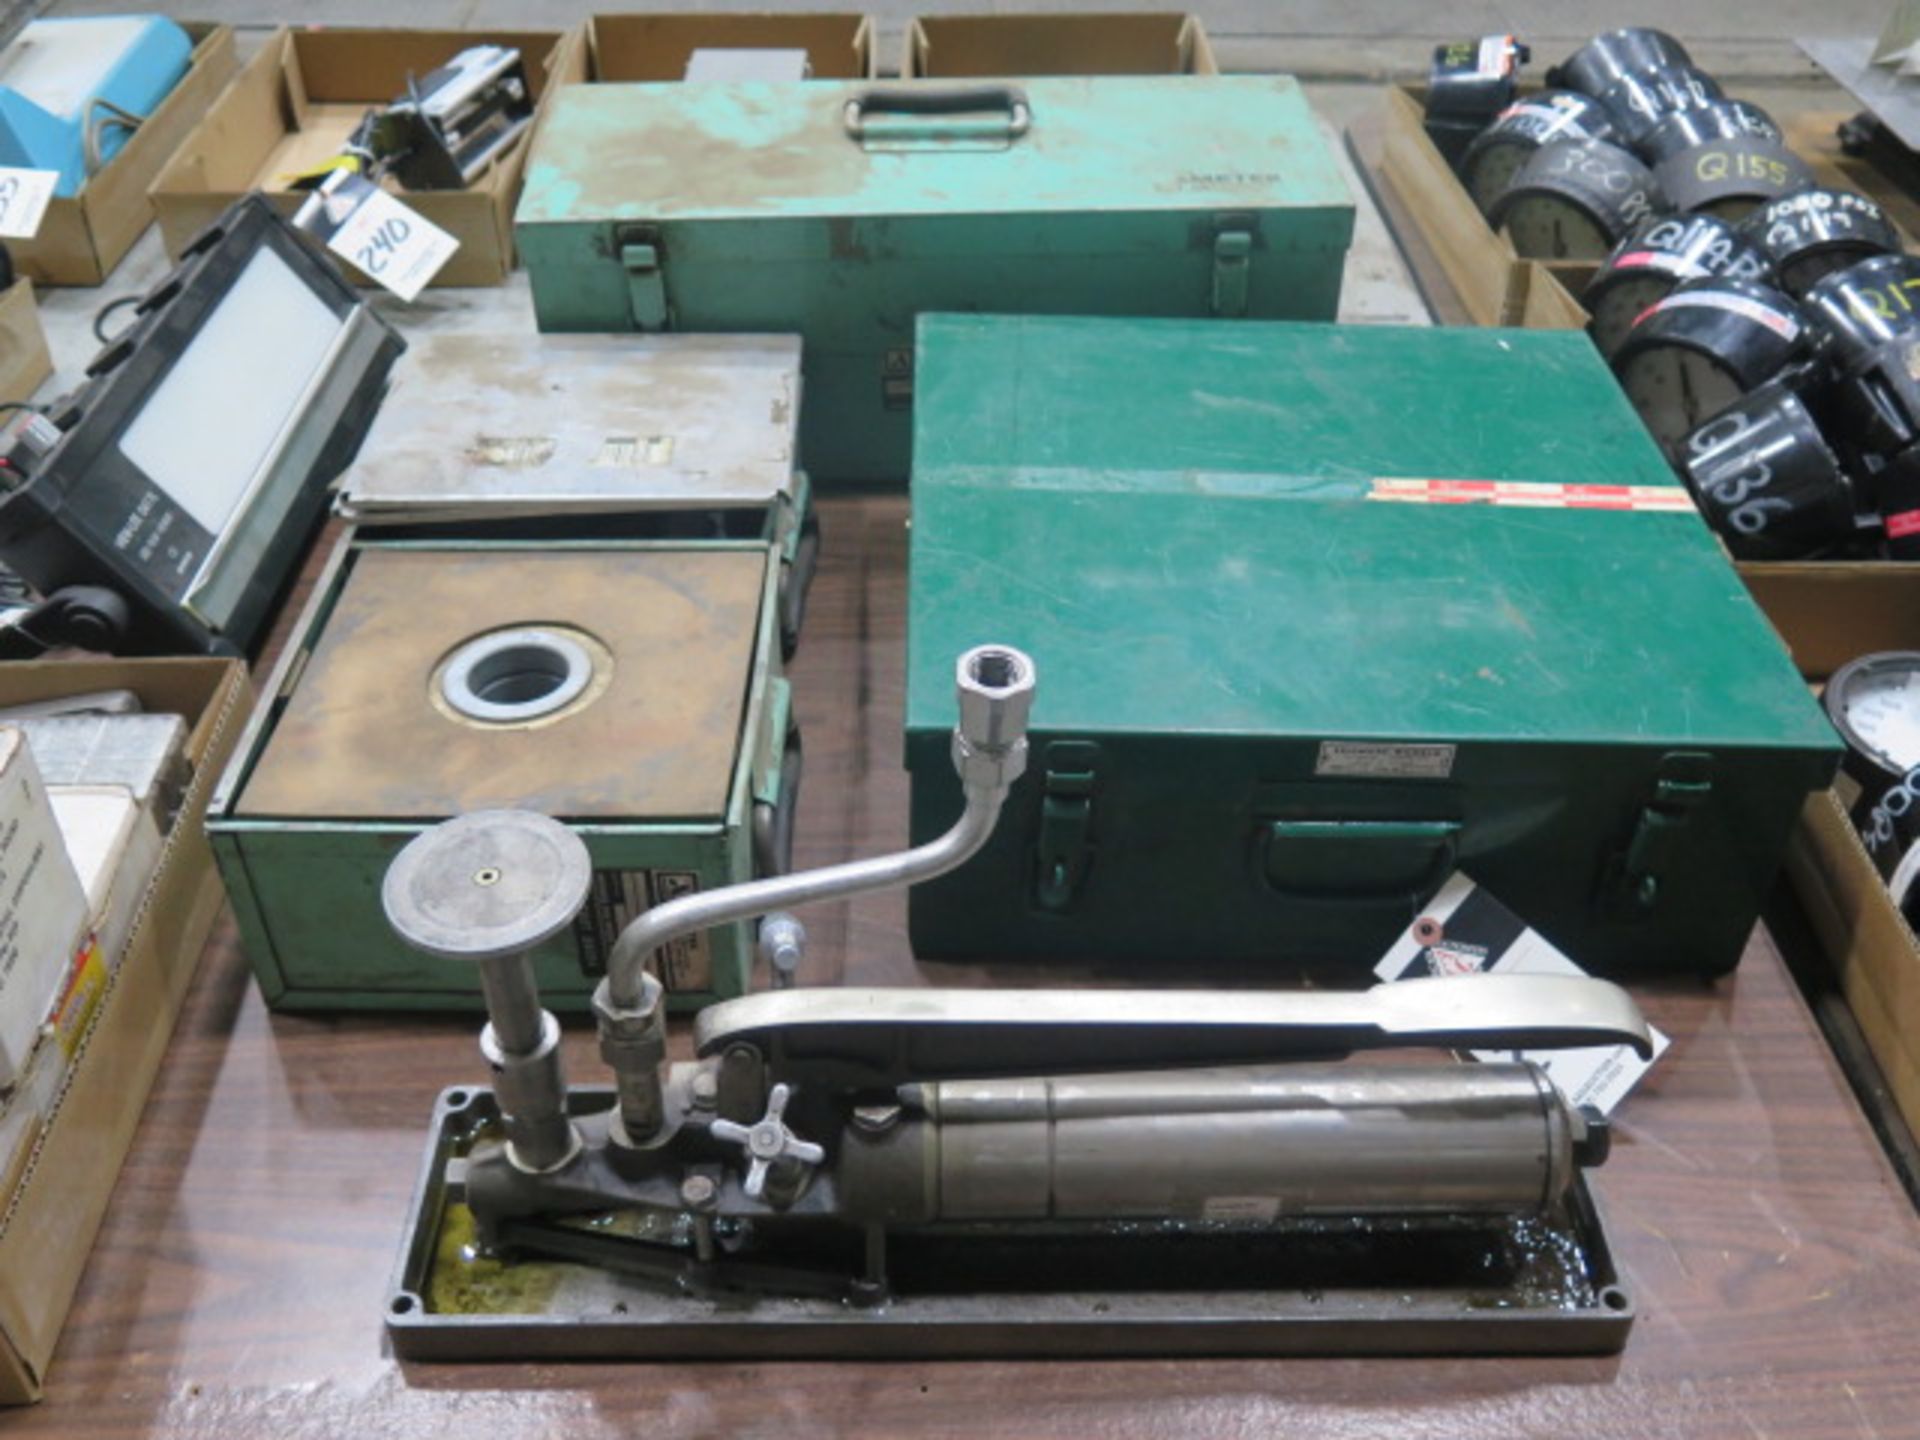 Mansfield & Green Dead Weight Tester and Skidmore Wilhelm mdl. HS-100 Bolt Tension Calibrator